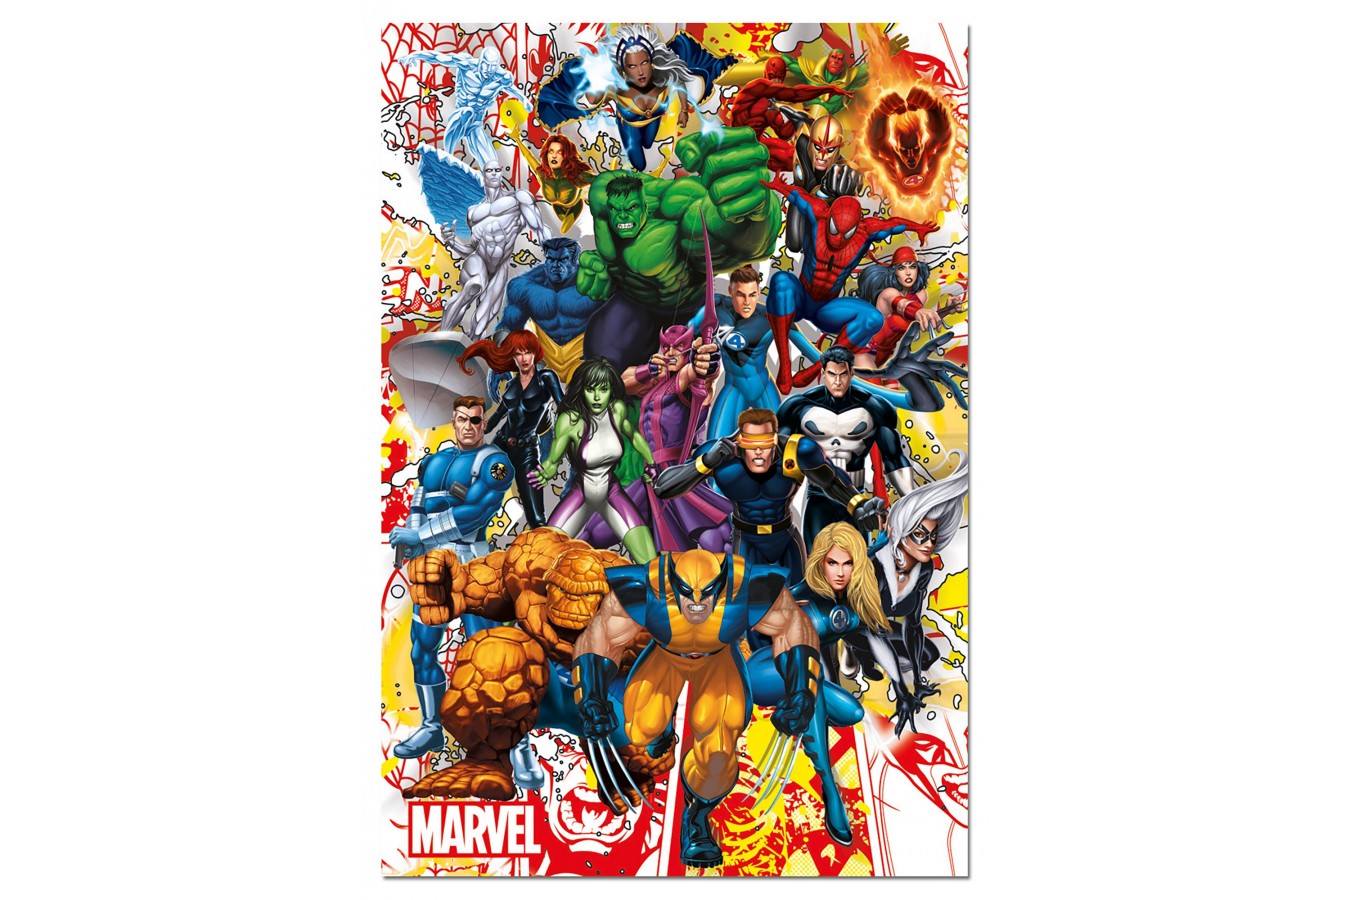 Puzzle Educa - Marvel Heroes, 500 piese, include lipici puzzle (15560)